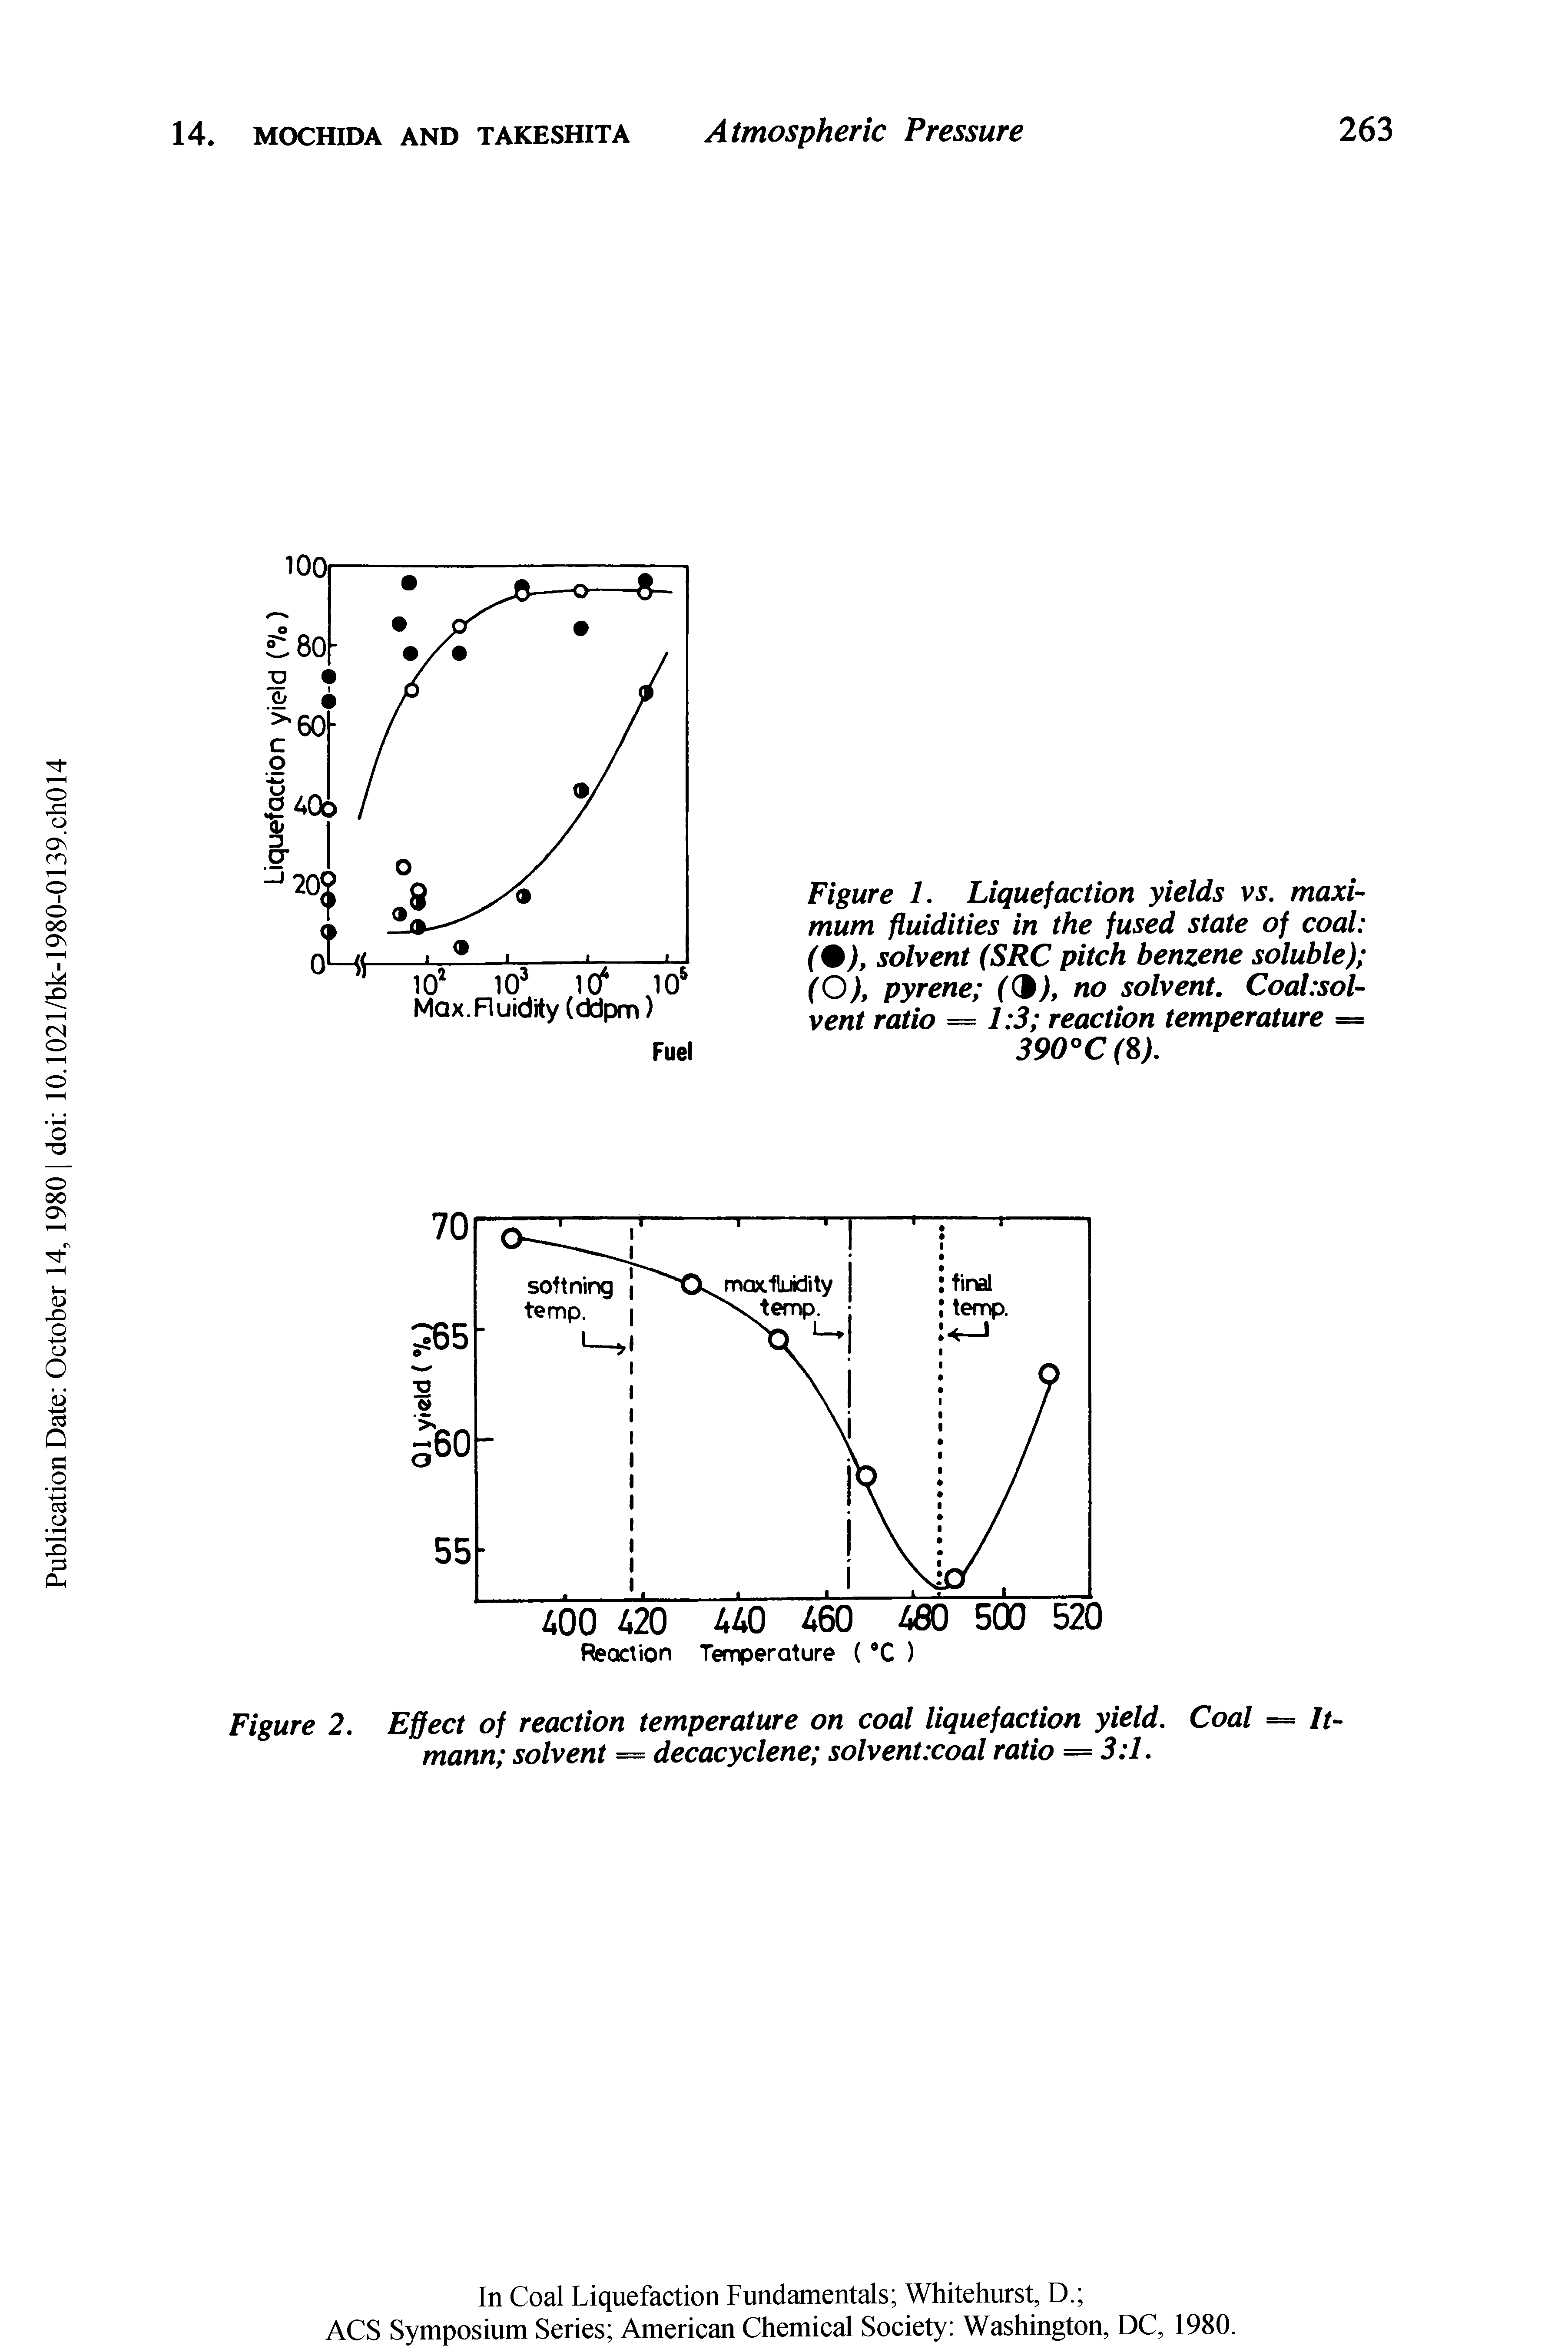 Figure 1. Liquefaction yields vs. maximum fluidities in the fused state of coal (%), solvent (SRC pitch benzene soluble) (O), pyrene ((B), no solvent. Coal.sol-vent ratio = 1 3 reaction temperature = 390°C(8).